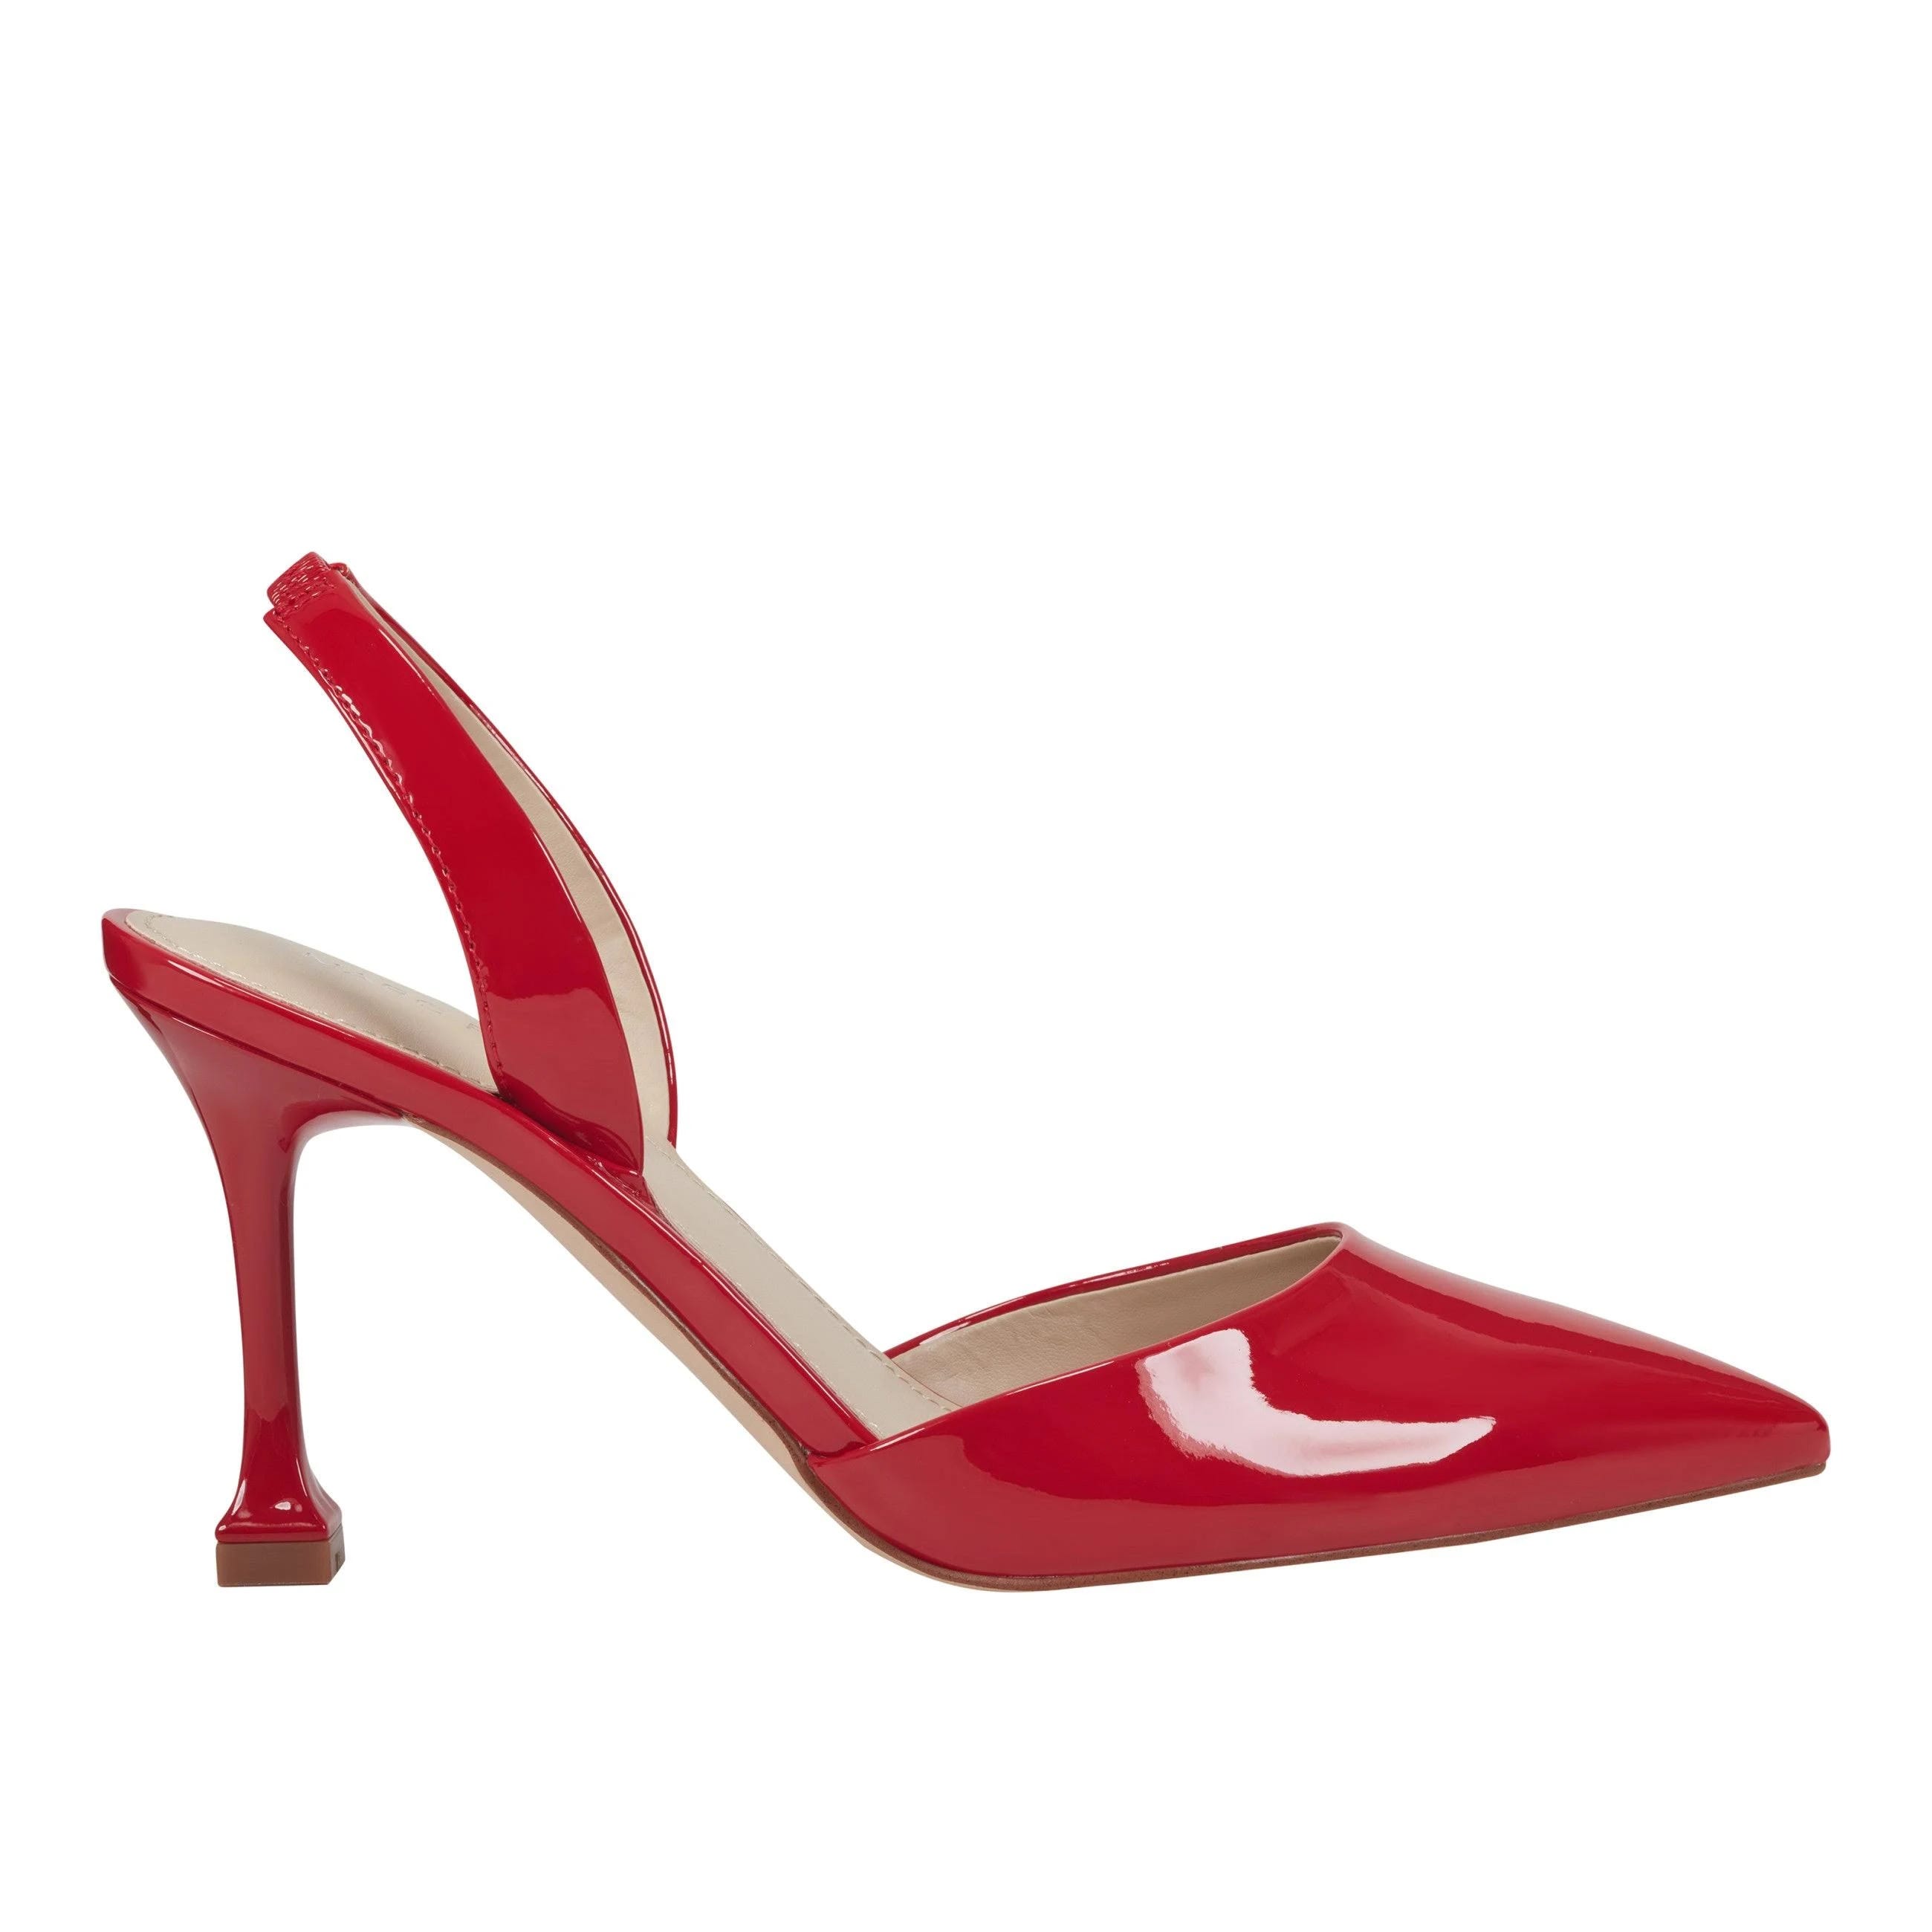 Red High Heel Pump for Women by Marc Fisher | Image